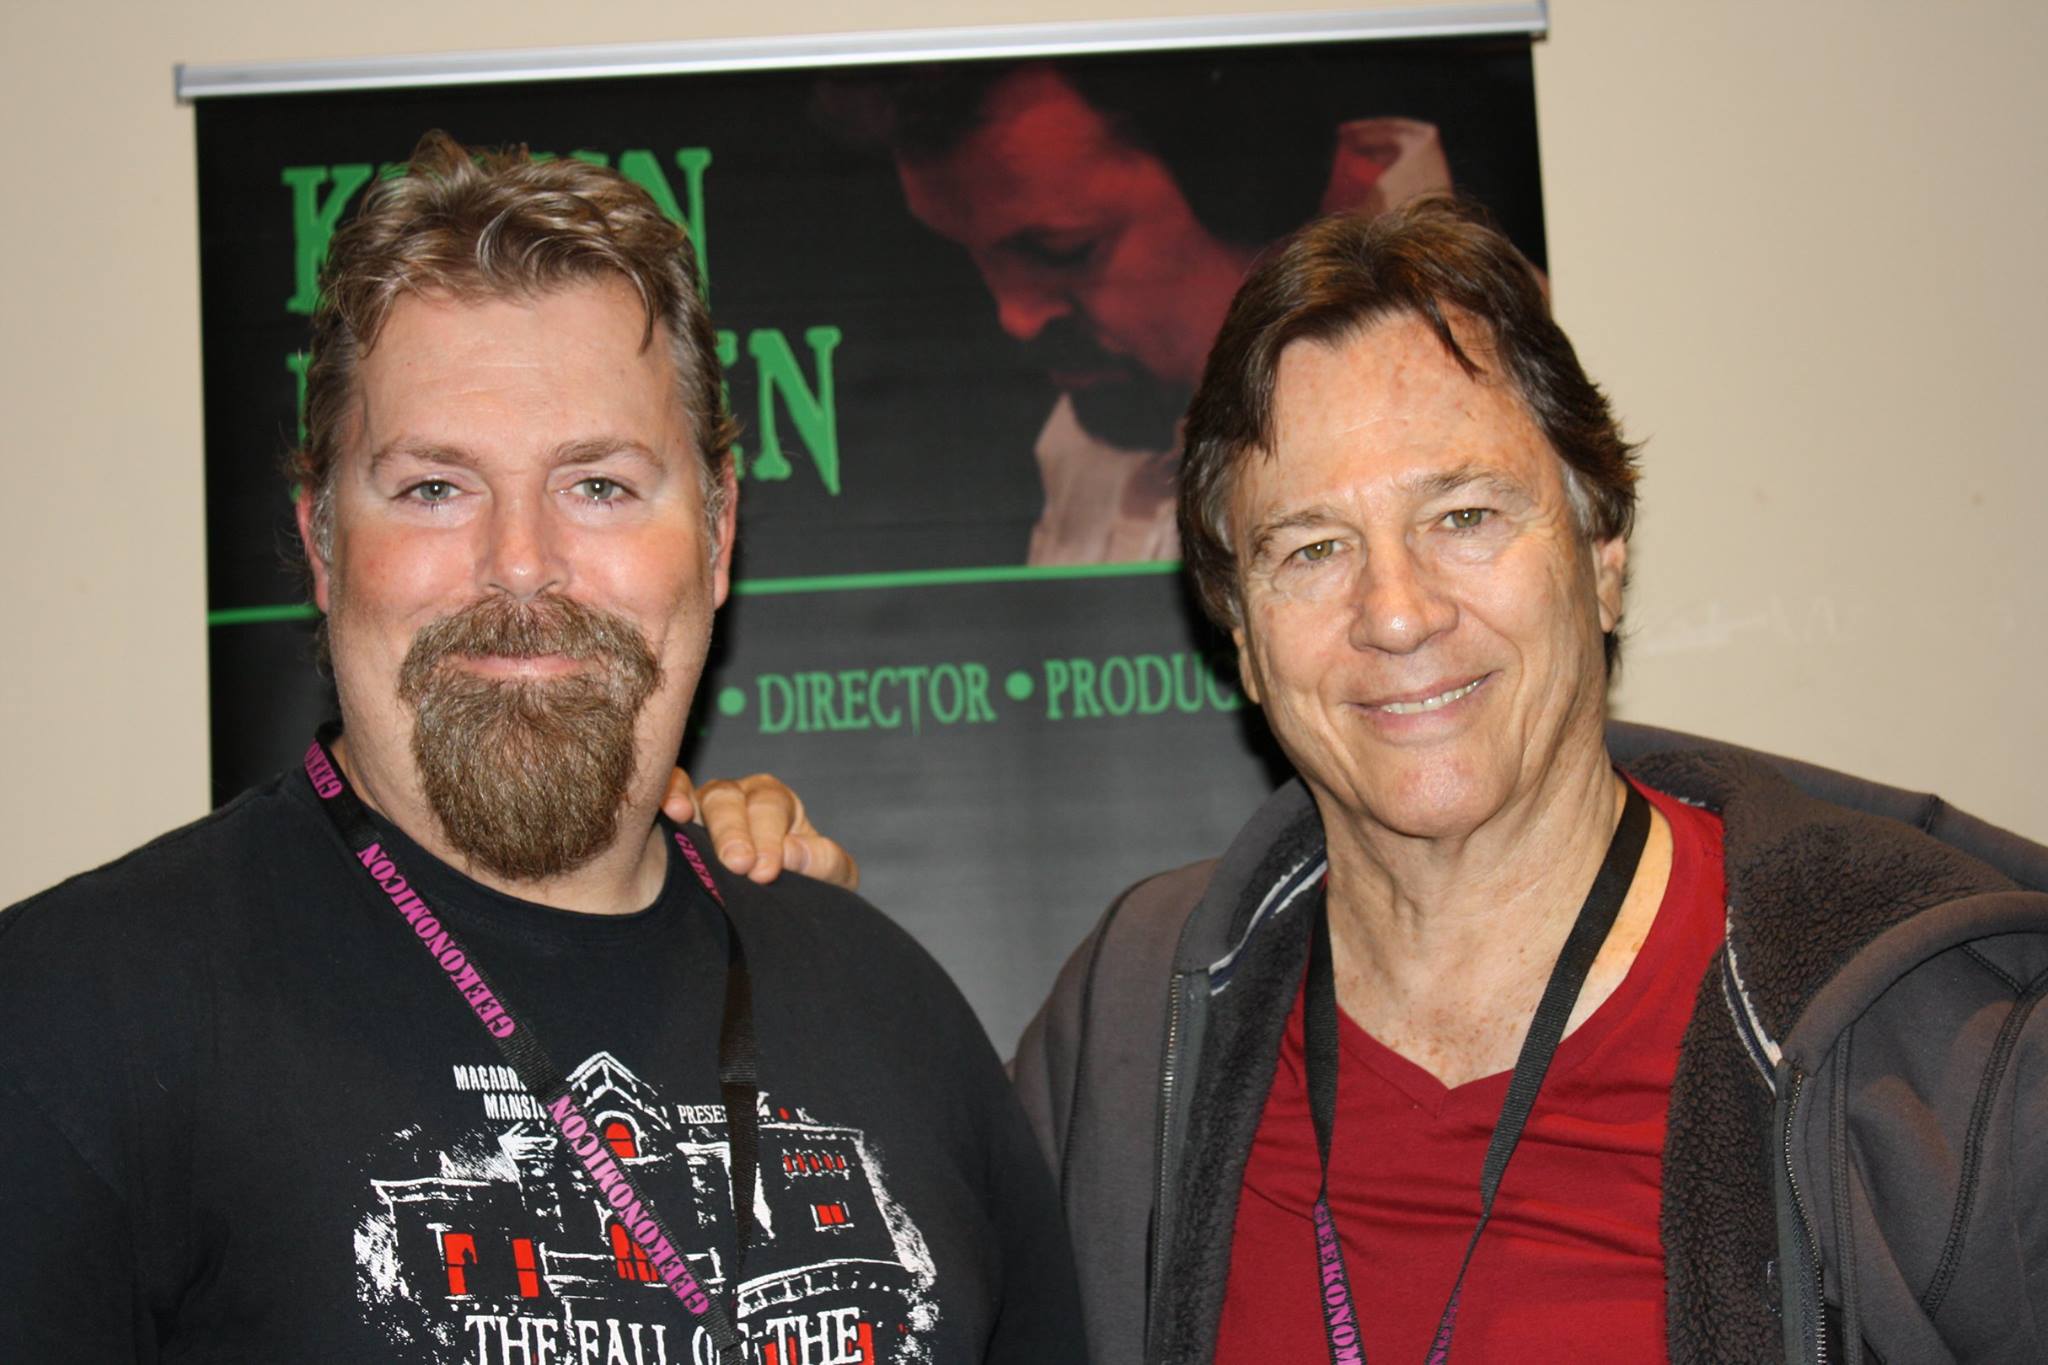 Appearing at Geekonomicon 2015 in Biloxi, MS with Richard Hatch